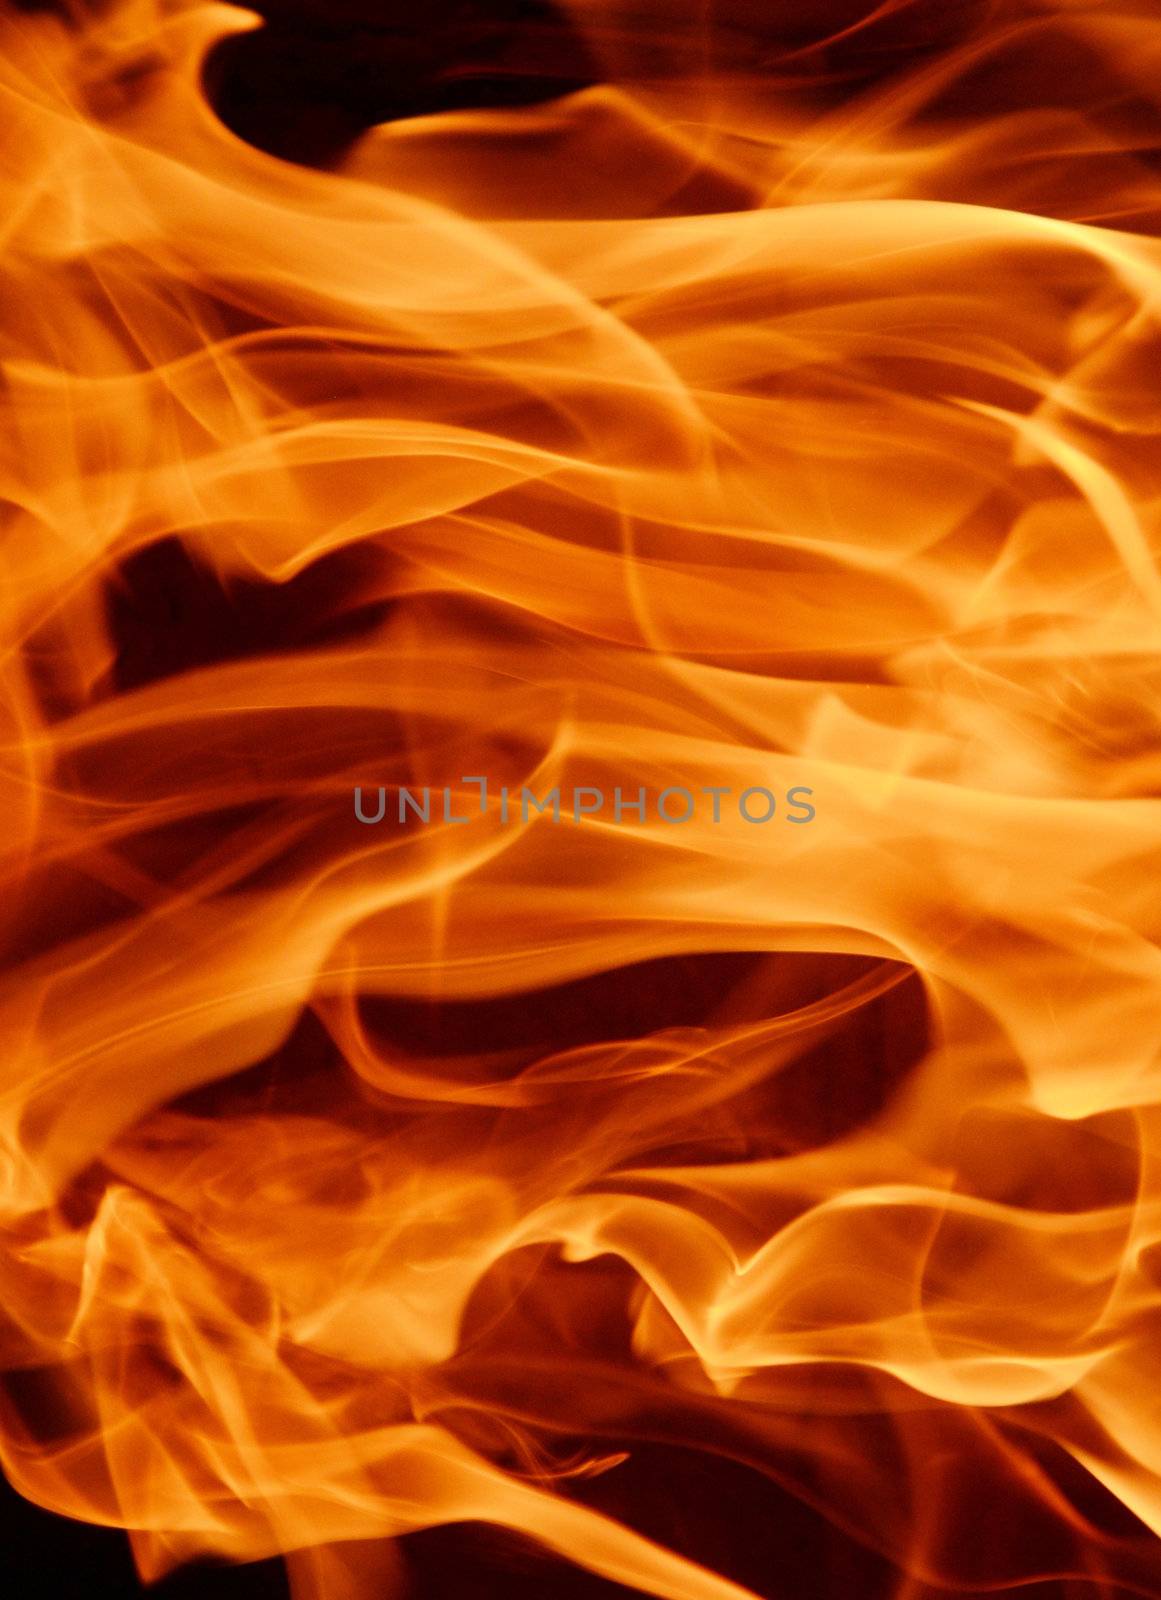 Abstract background / backdrop representing fire. flame pattern with dark and light spots. Can be used as a wallpaper